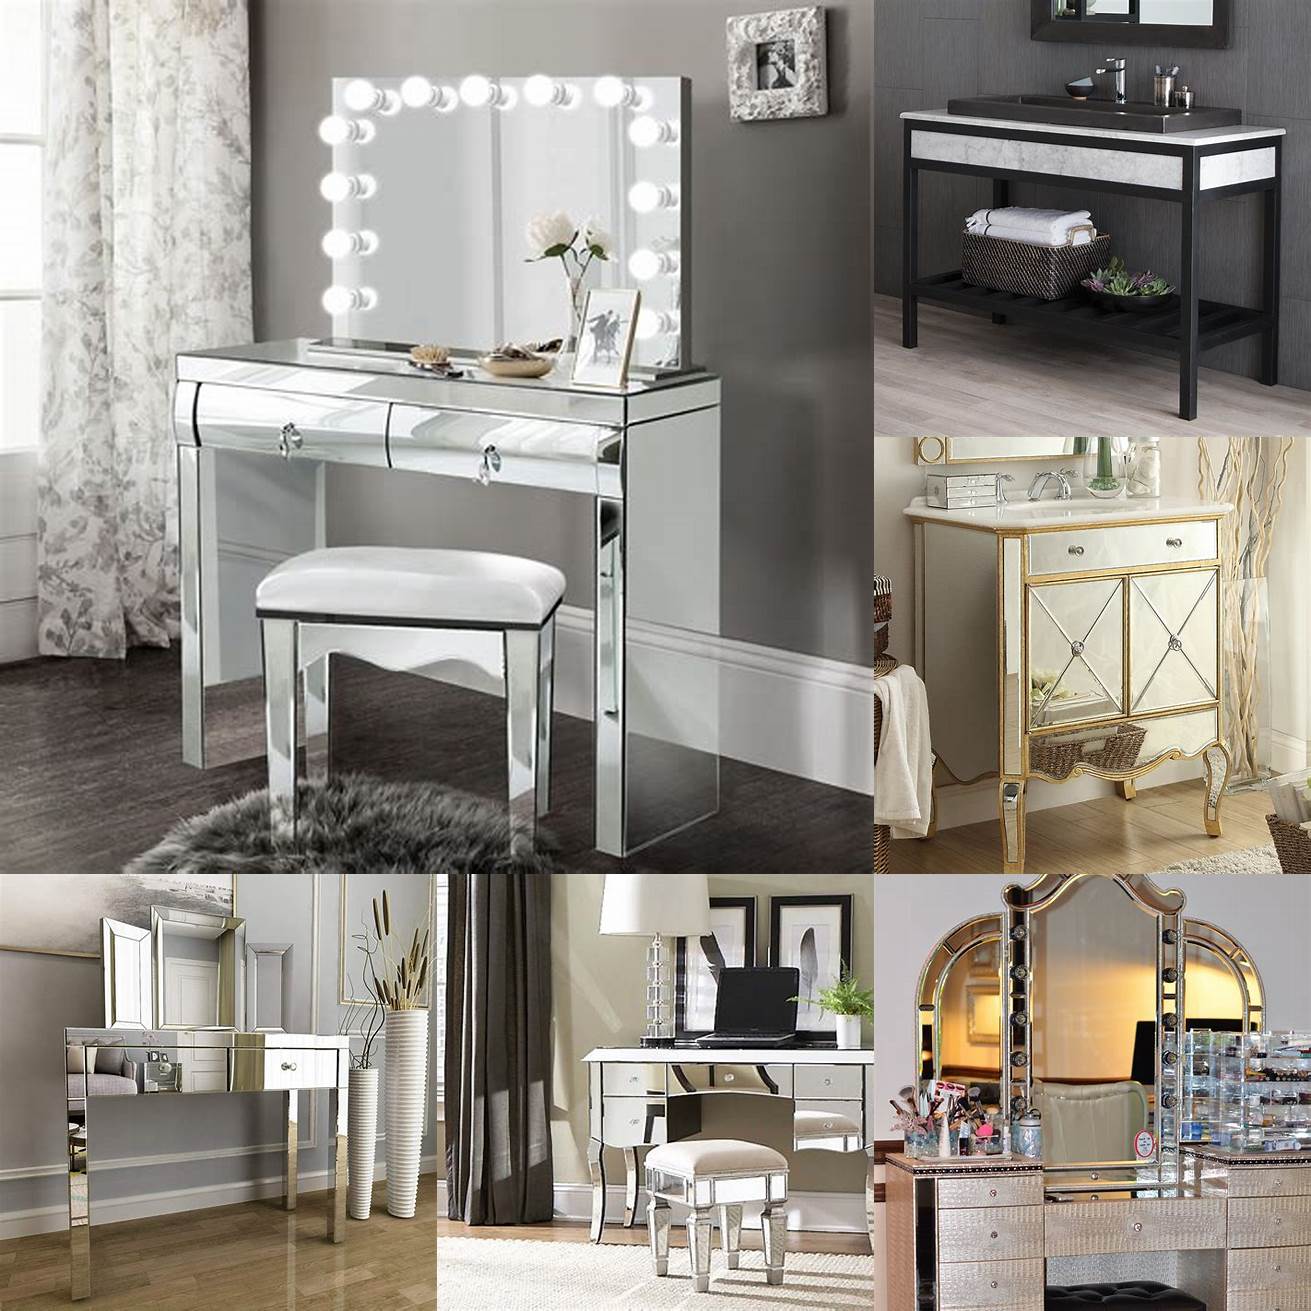 5 Mirrored petite vanity with a metal frame